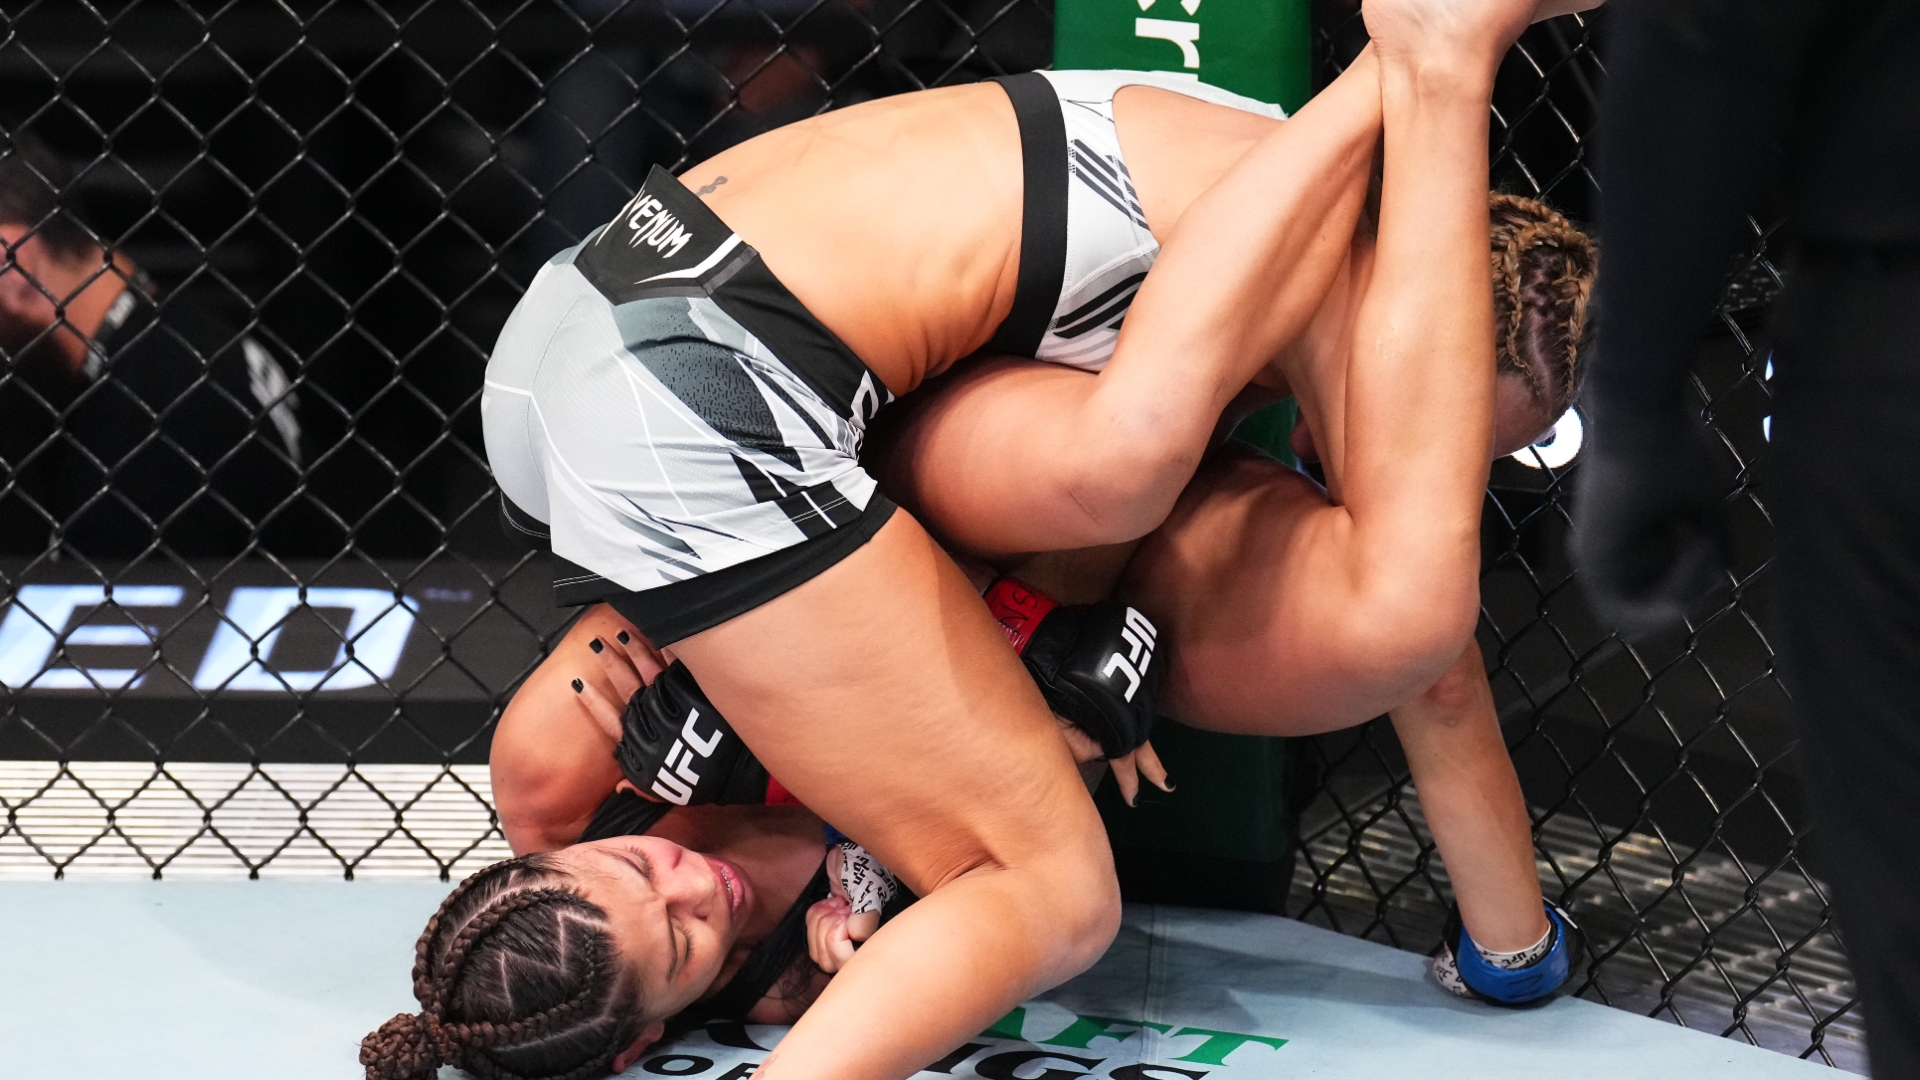 Mayra Bueno Silva wins after odd ending to fight